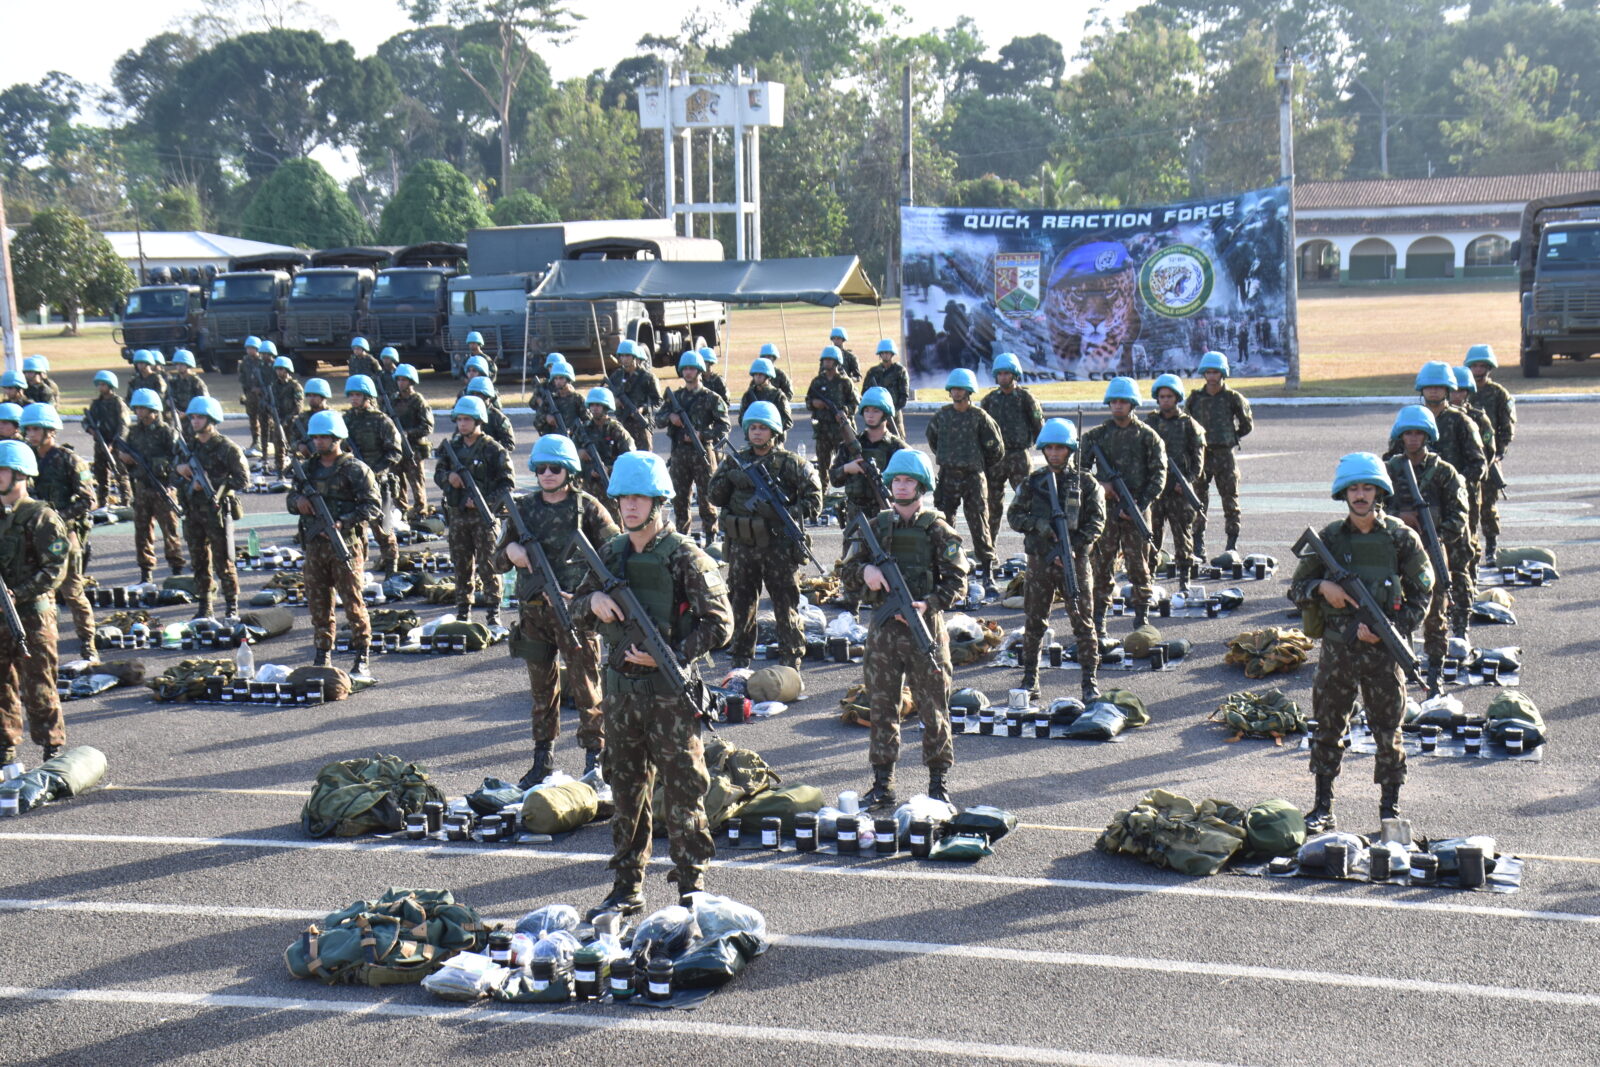 Brazilian Army troops are certified to act as a Rapid Reaction Force in peacekeeping missions